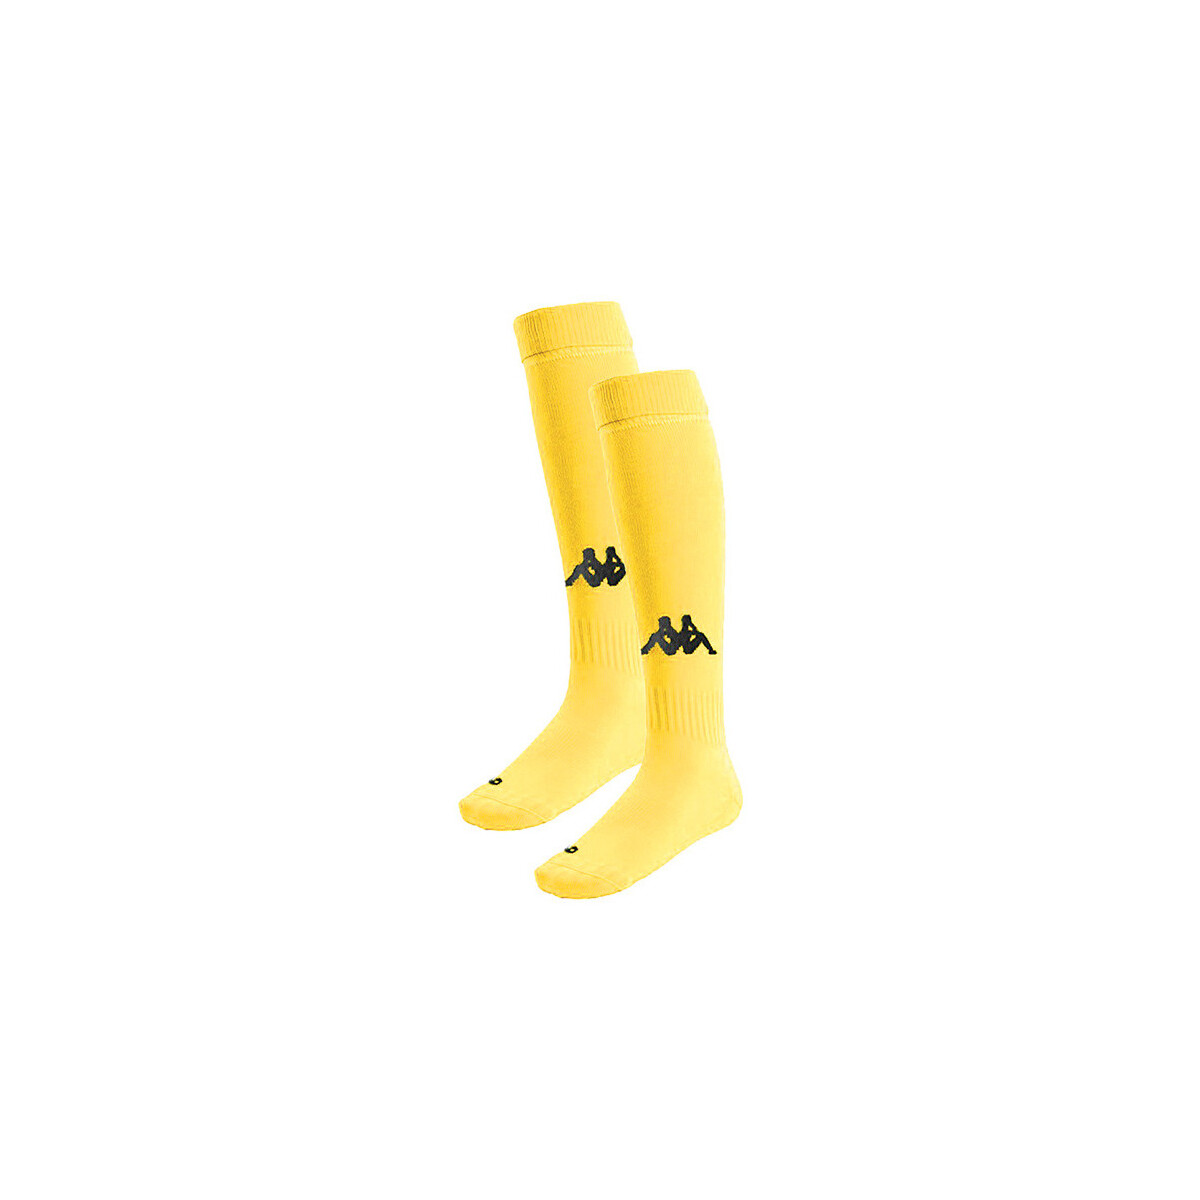 Kappa Jaune Chaussettes Penao Fluo (3 paires) 3KP2hFol